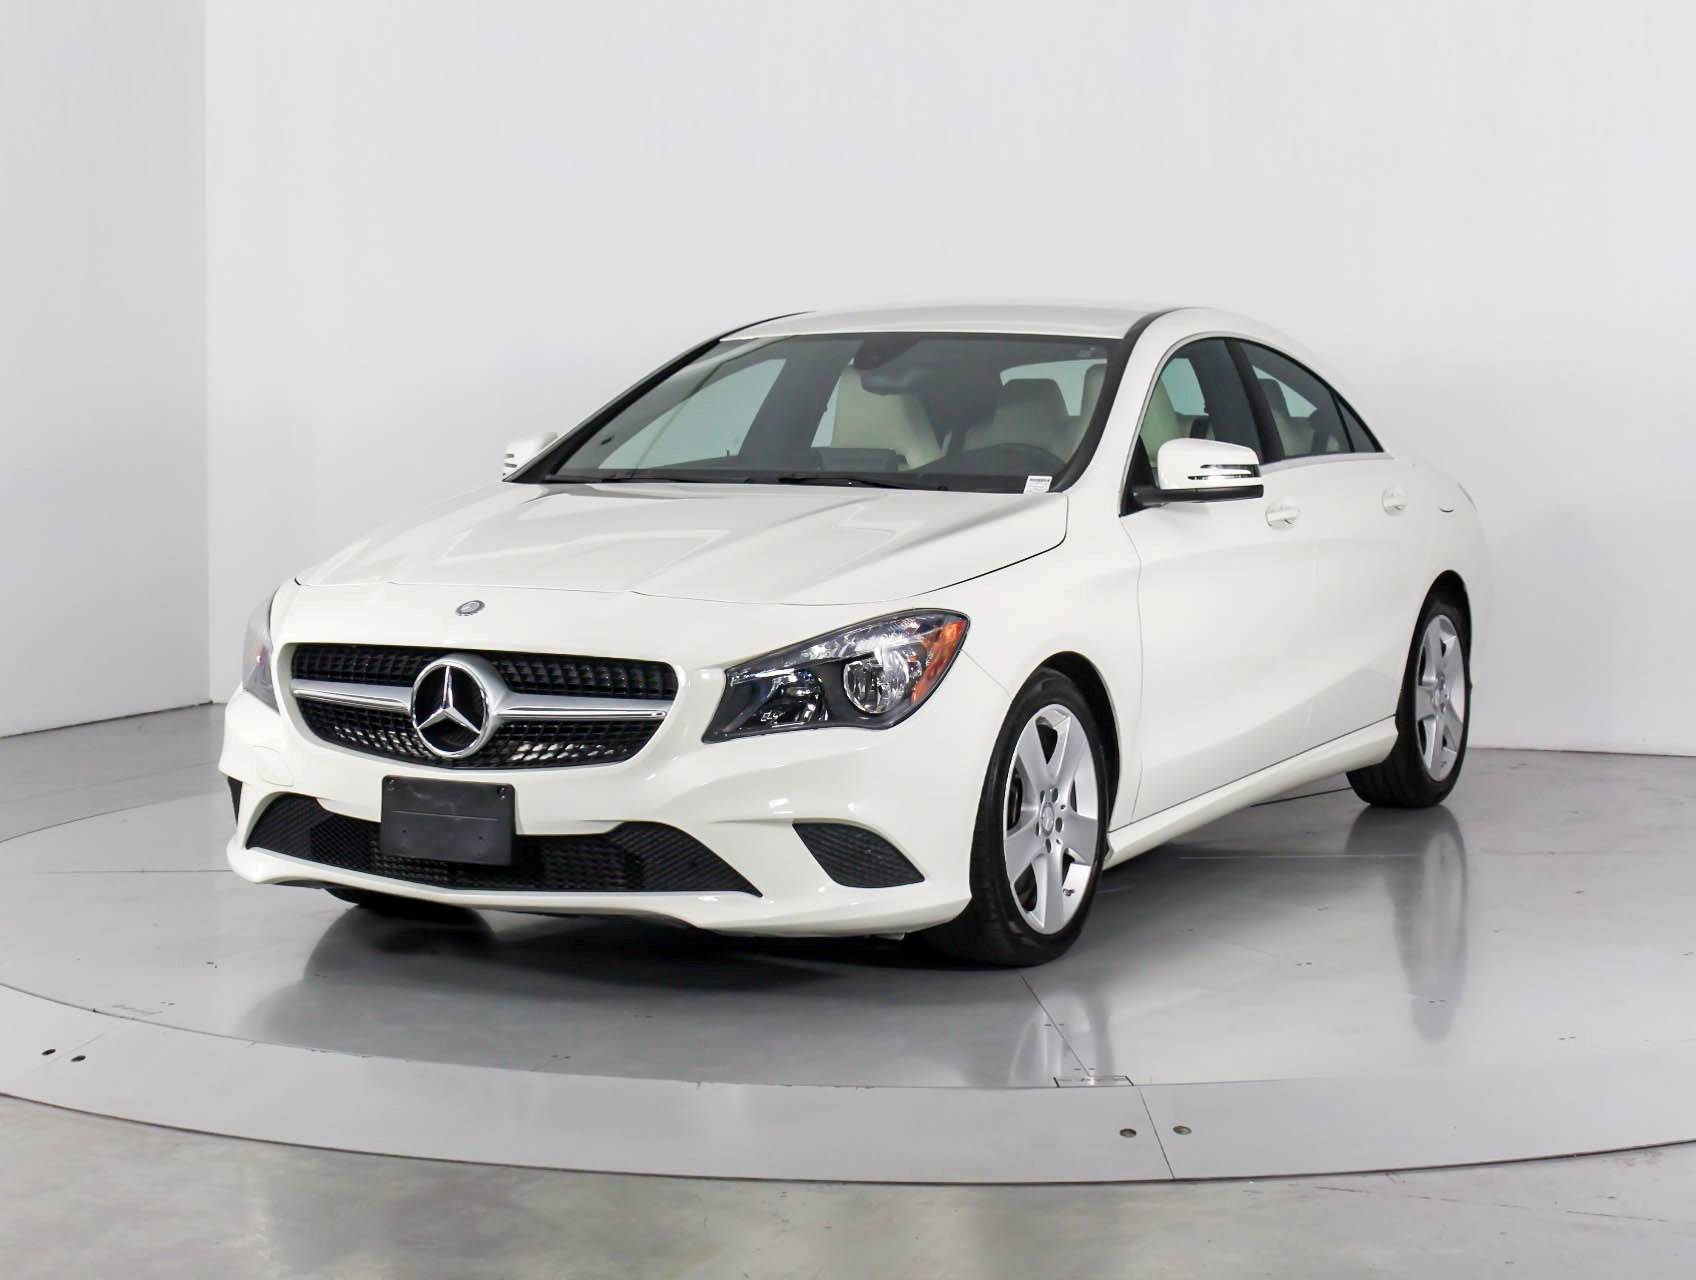 Used 2016 MERCEDES-BENZ CLA CLASS CLA250 4MATIC for sale in WEST PALM |  104124